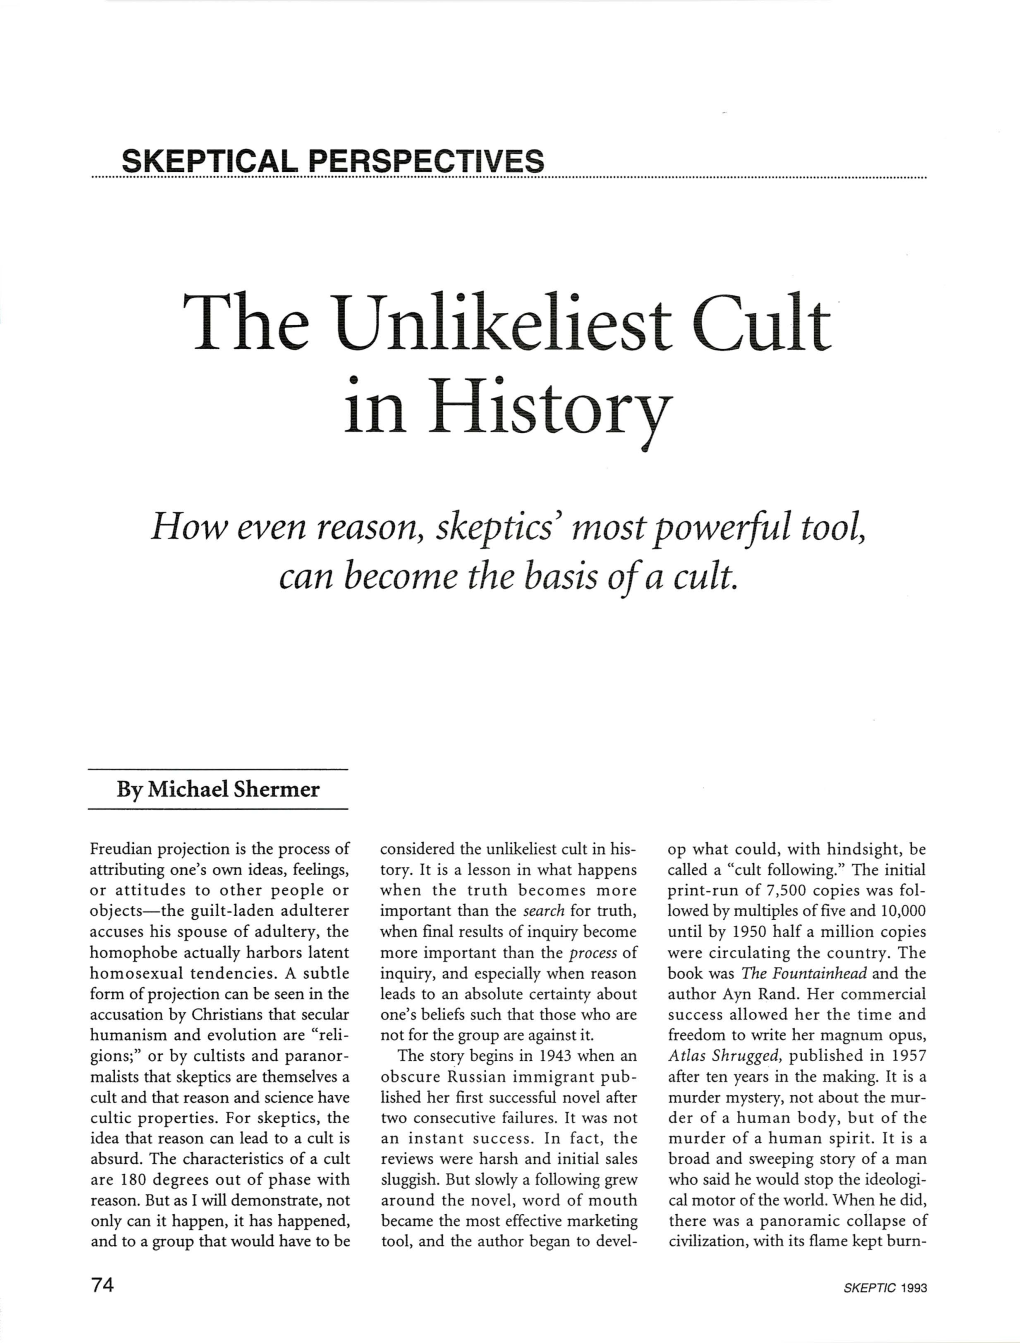 The Unlikeliest Cult in History